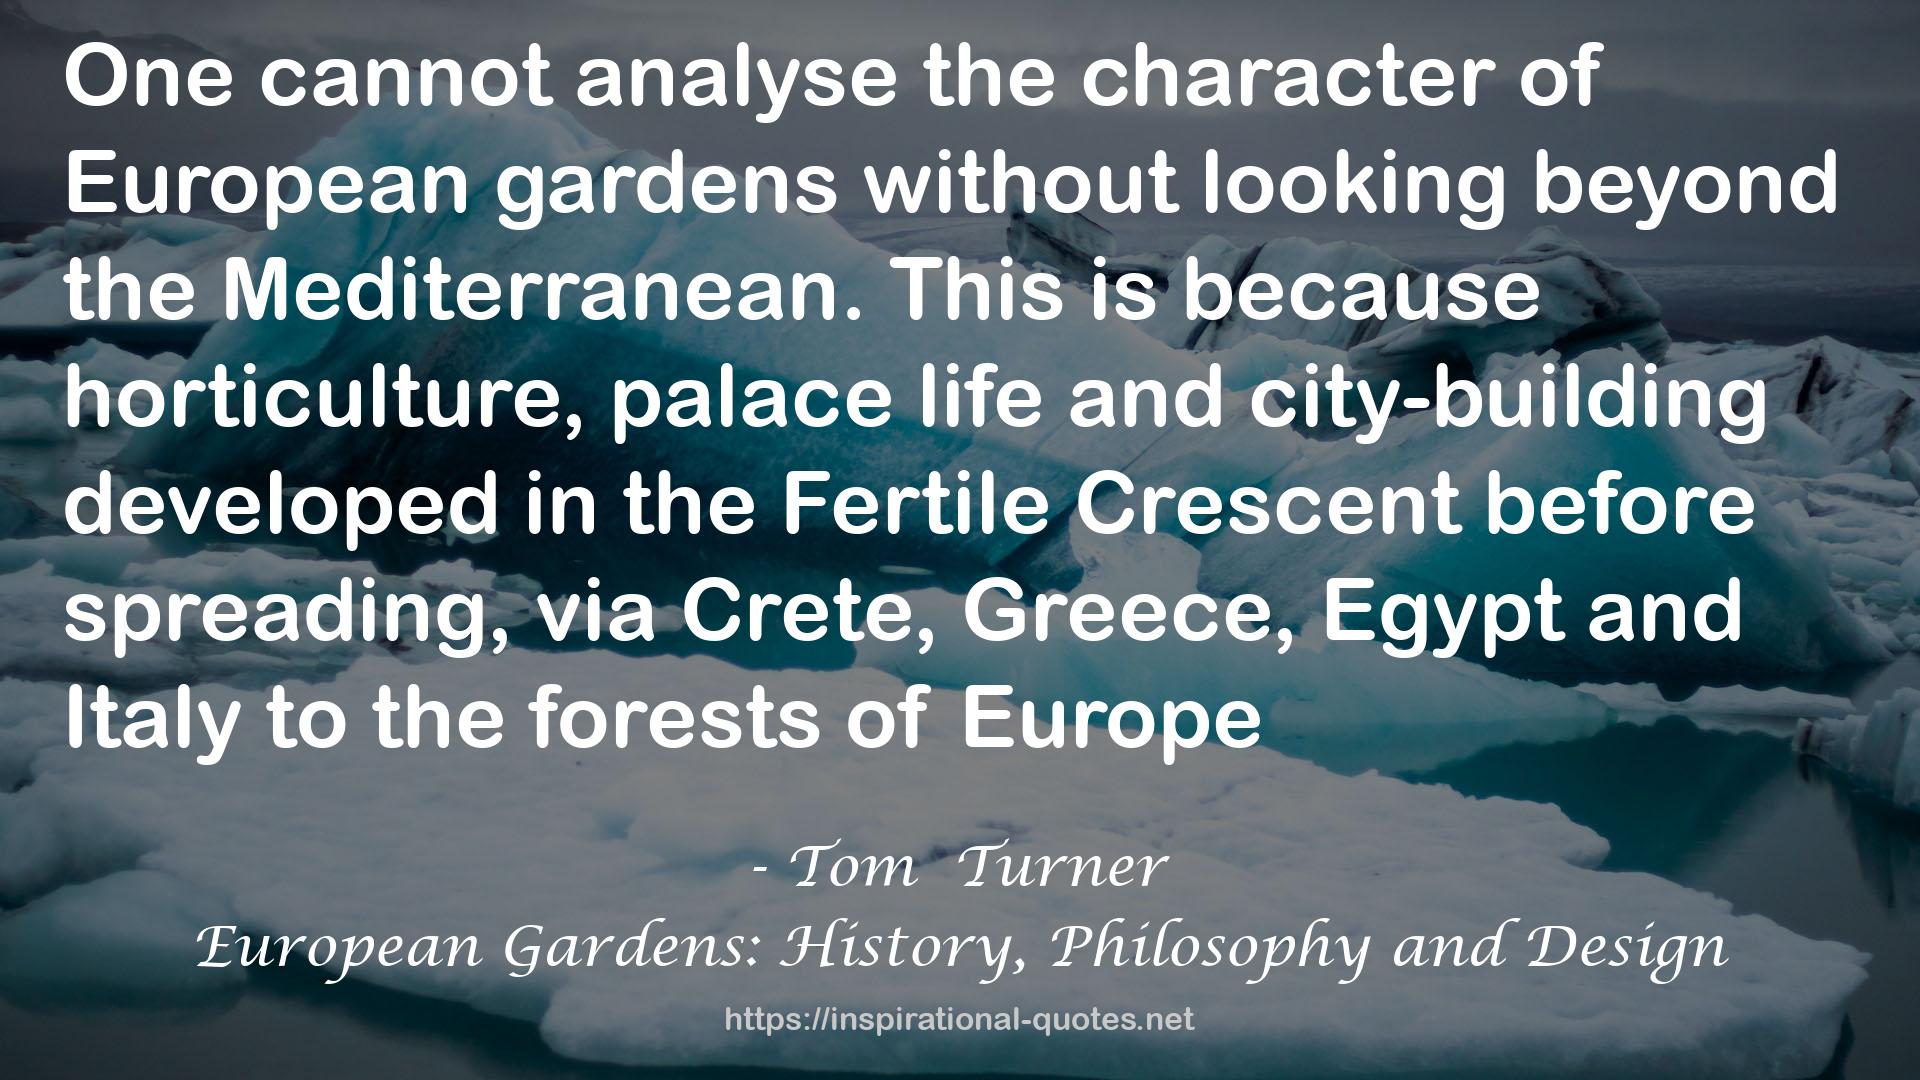 European Gardens: History, Philosophy and Design QUOTES